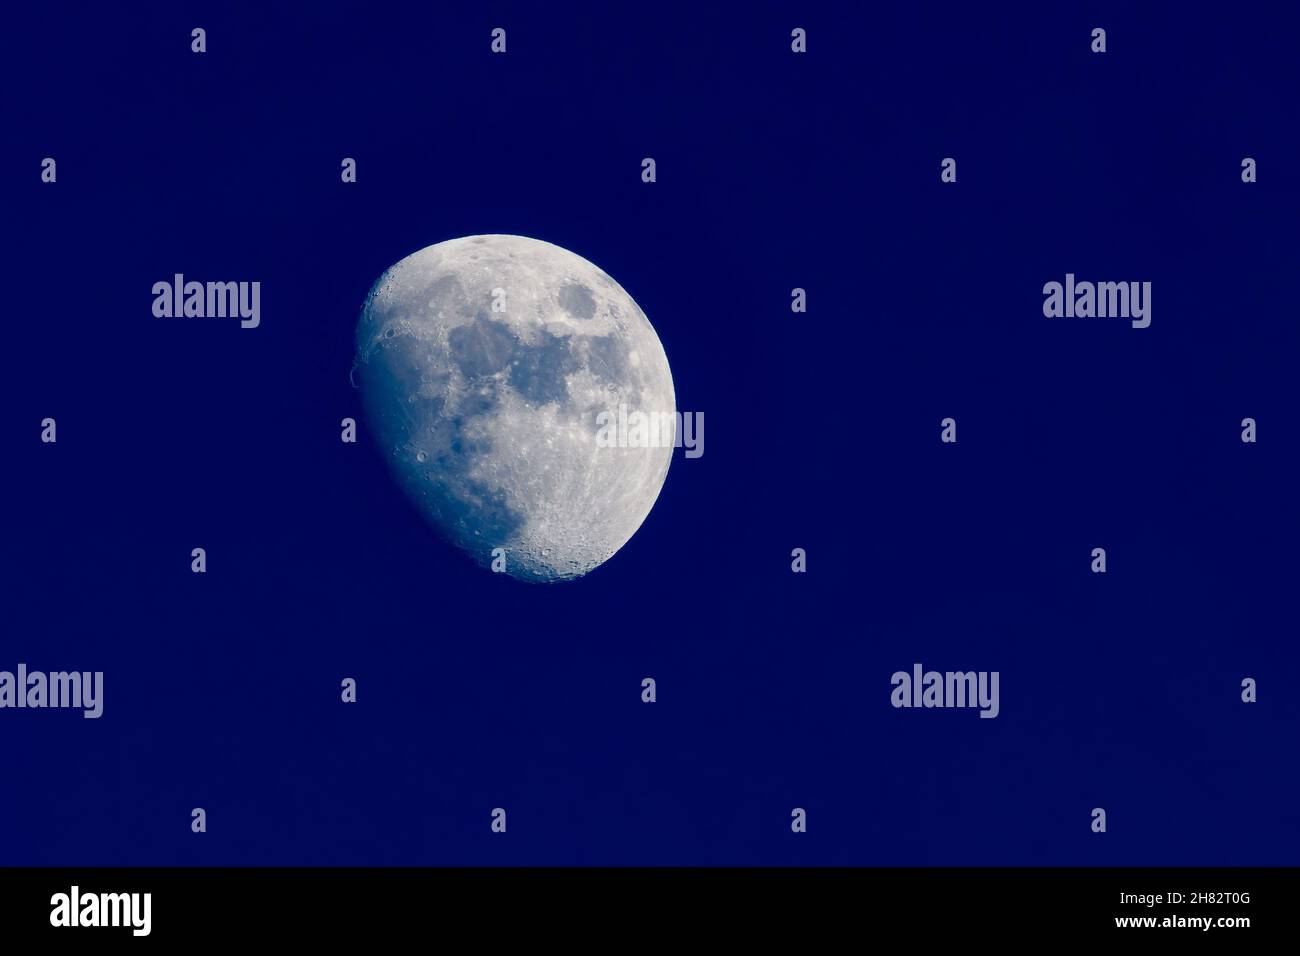 Clear image of waxing gibbous moon on clear blue evening. Stock Photo